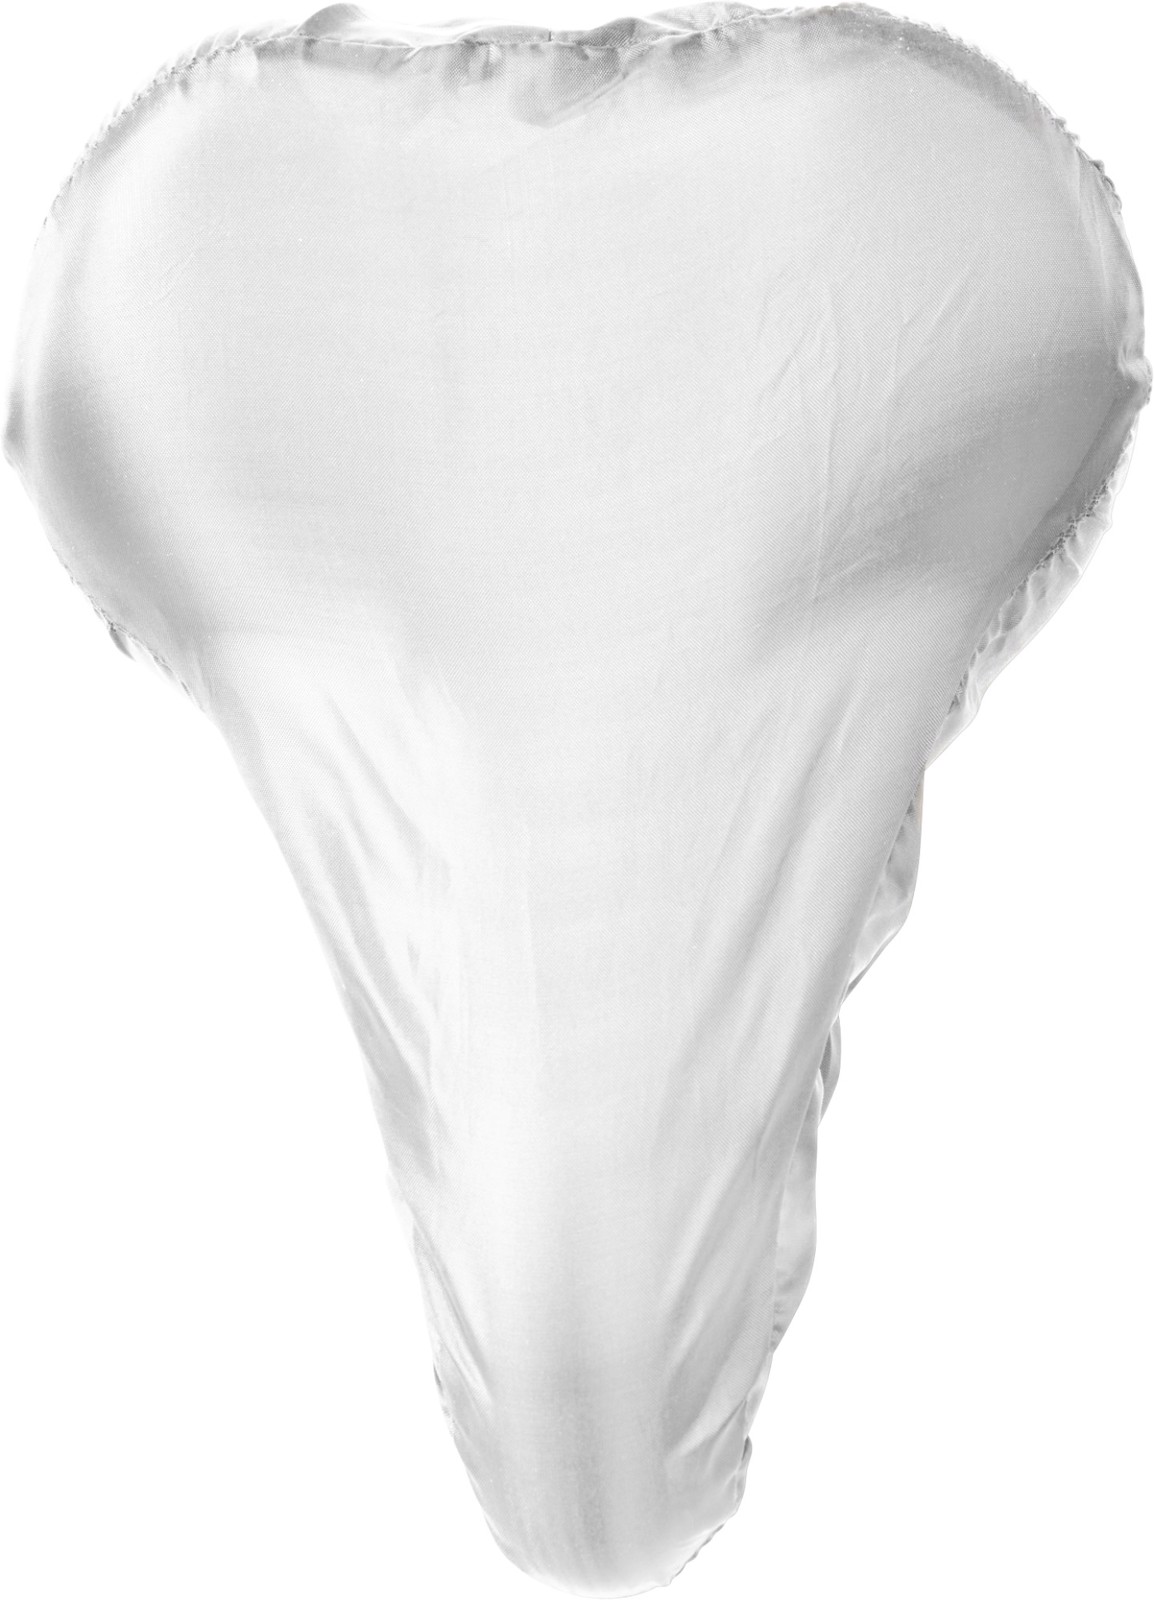 Polyester (190T) bicycle seat cover - White